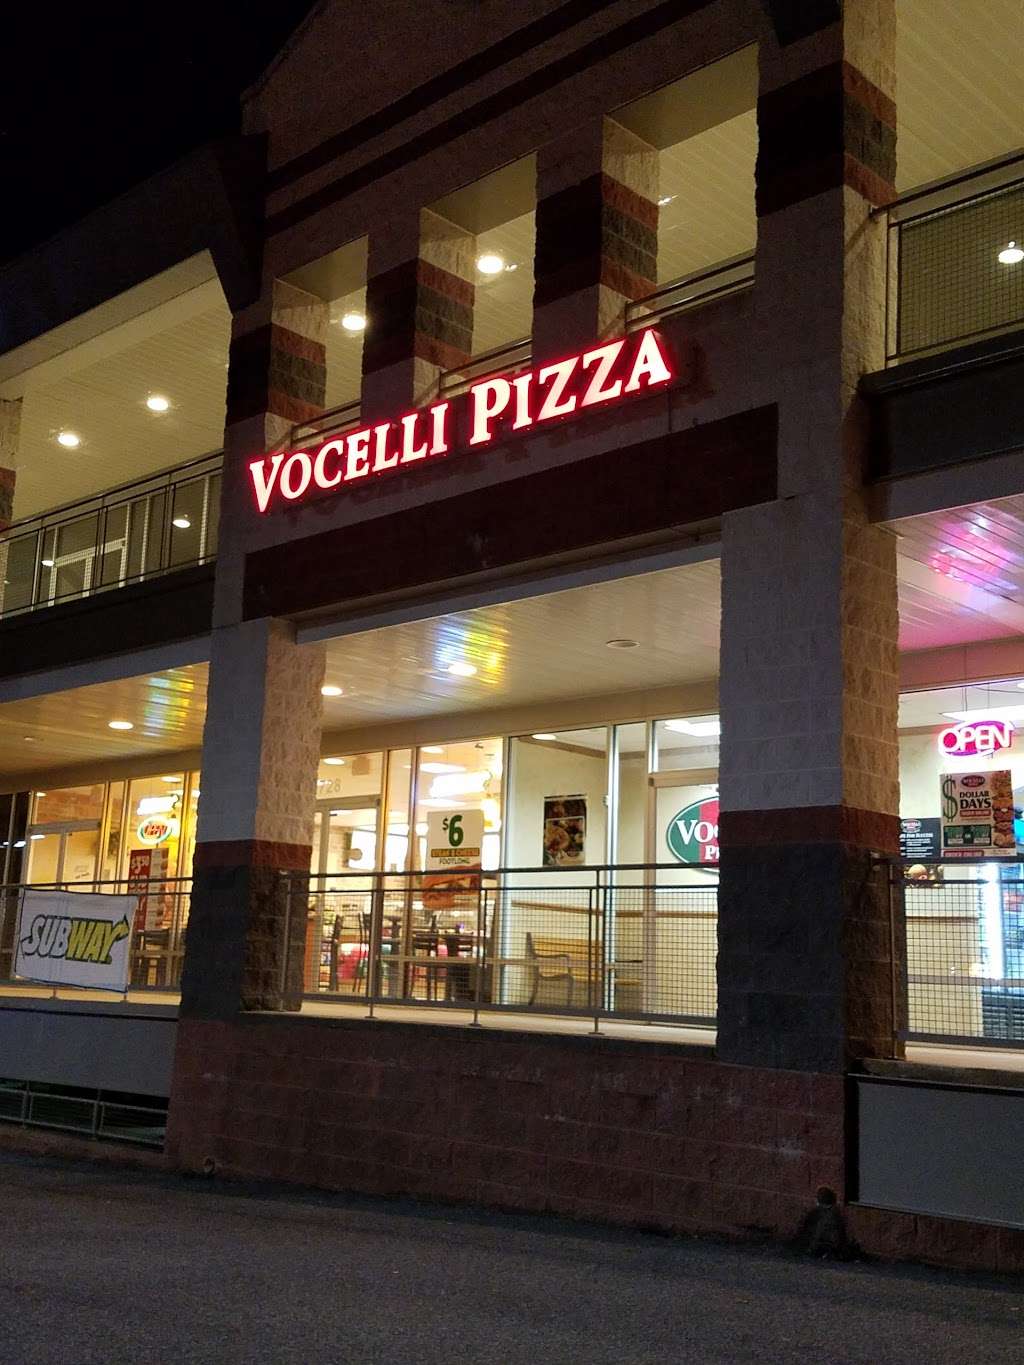 Vocelli Pizza - meal delivery  | Photo 2 of 4 | Address: 730 Cloverly St, Silver Spring, MD 20905, USA | Phone: (301) 879-8008